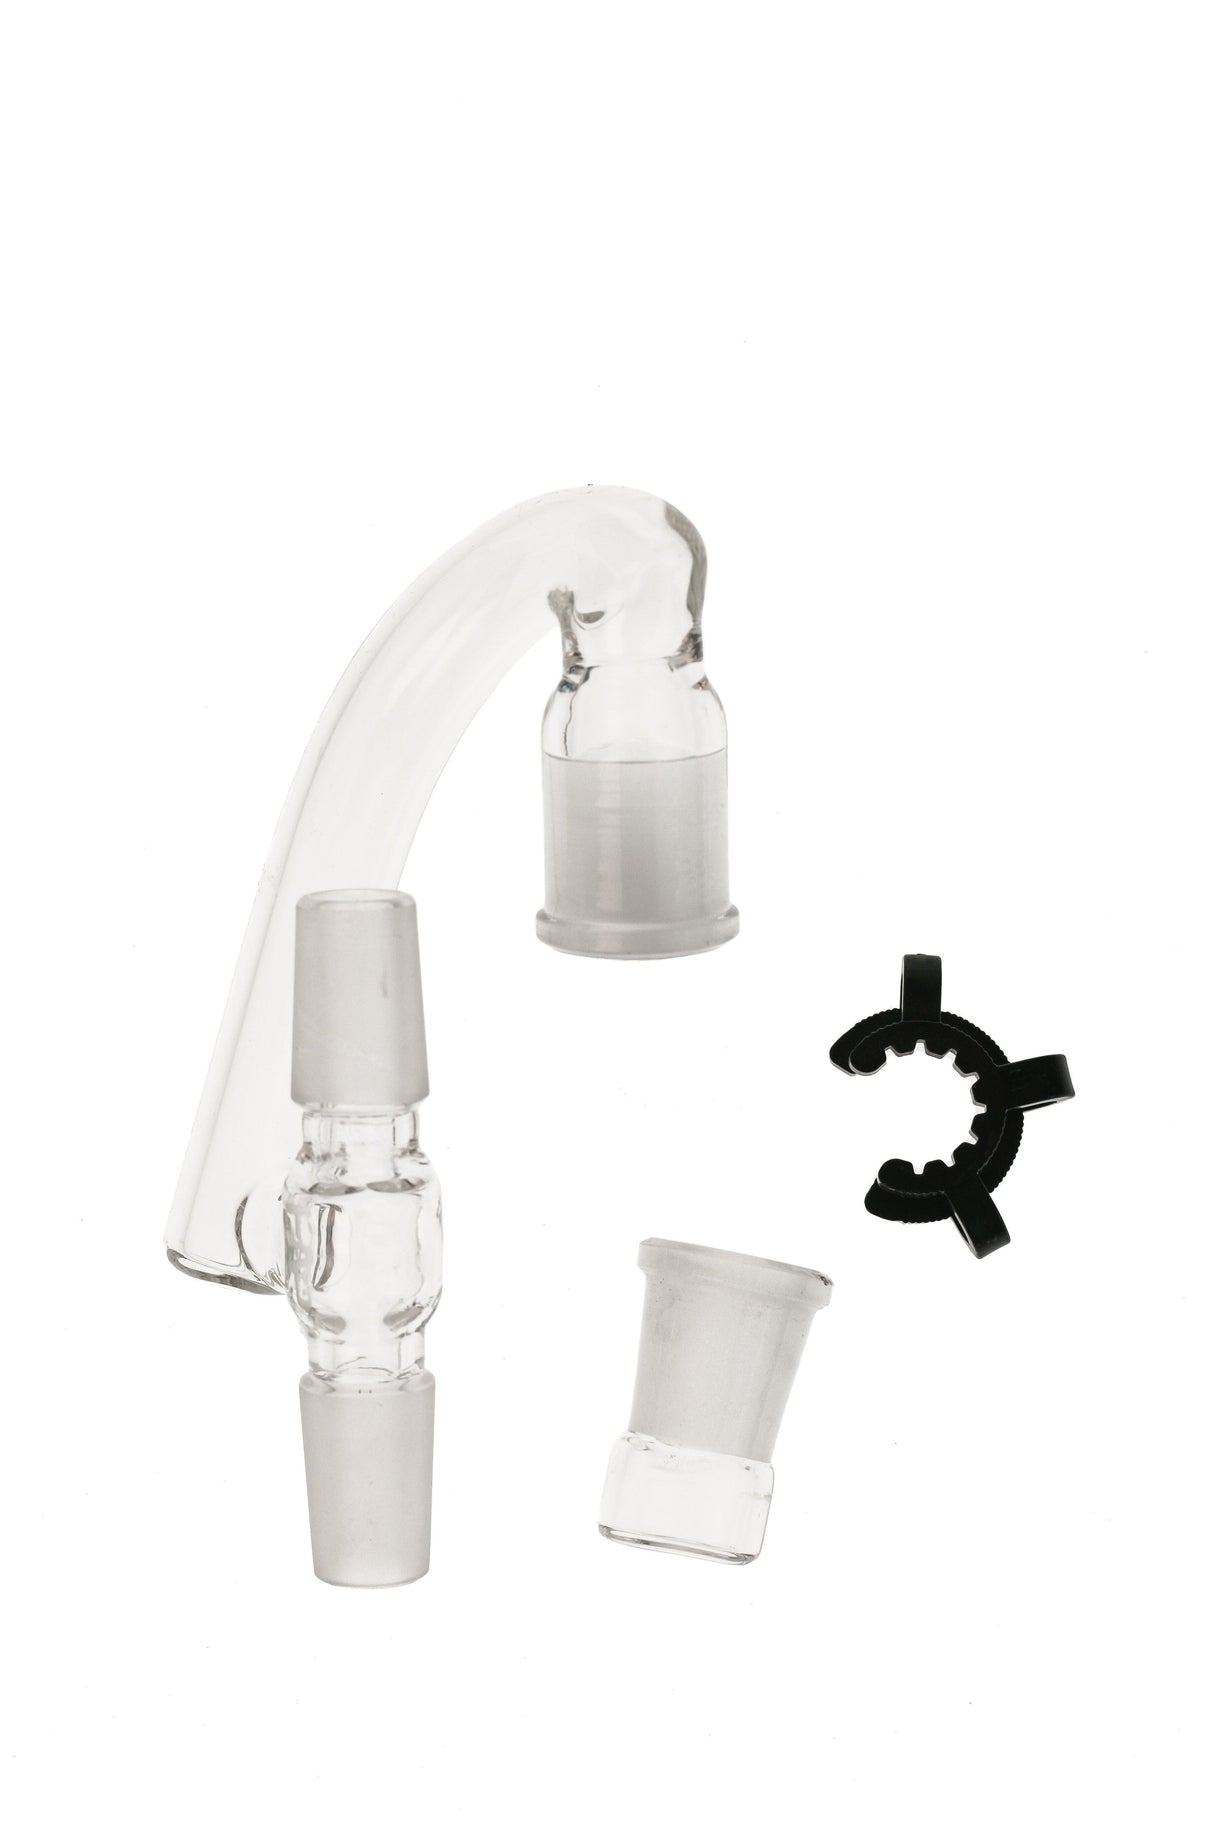 TAG - Clear Reclaim Drop Down Adapter with 14mm Male to Female Joint on White Background